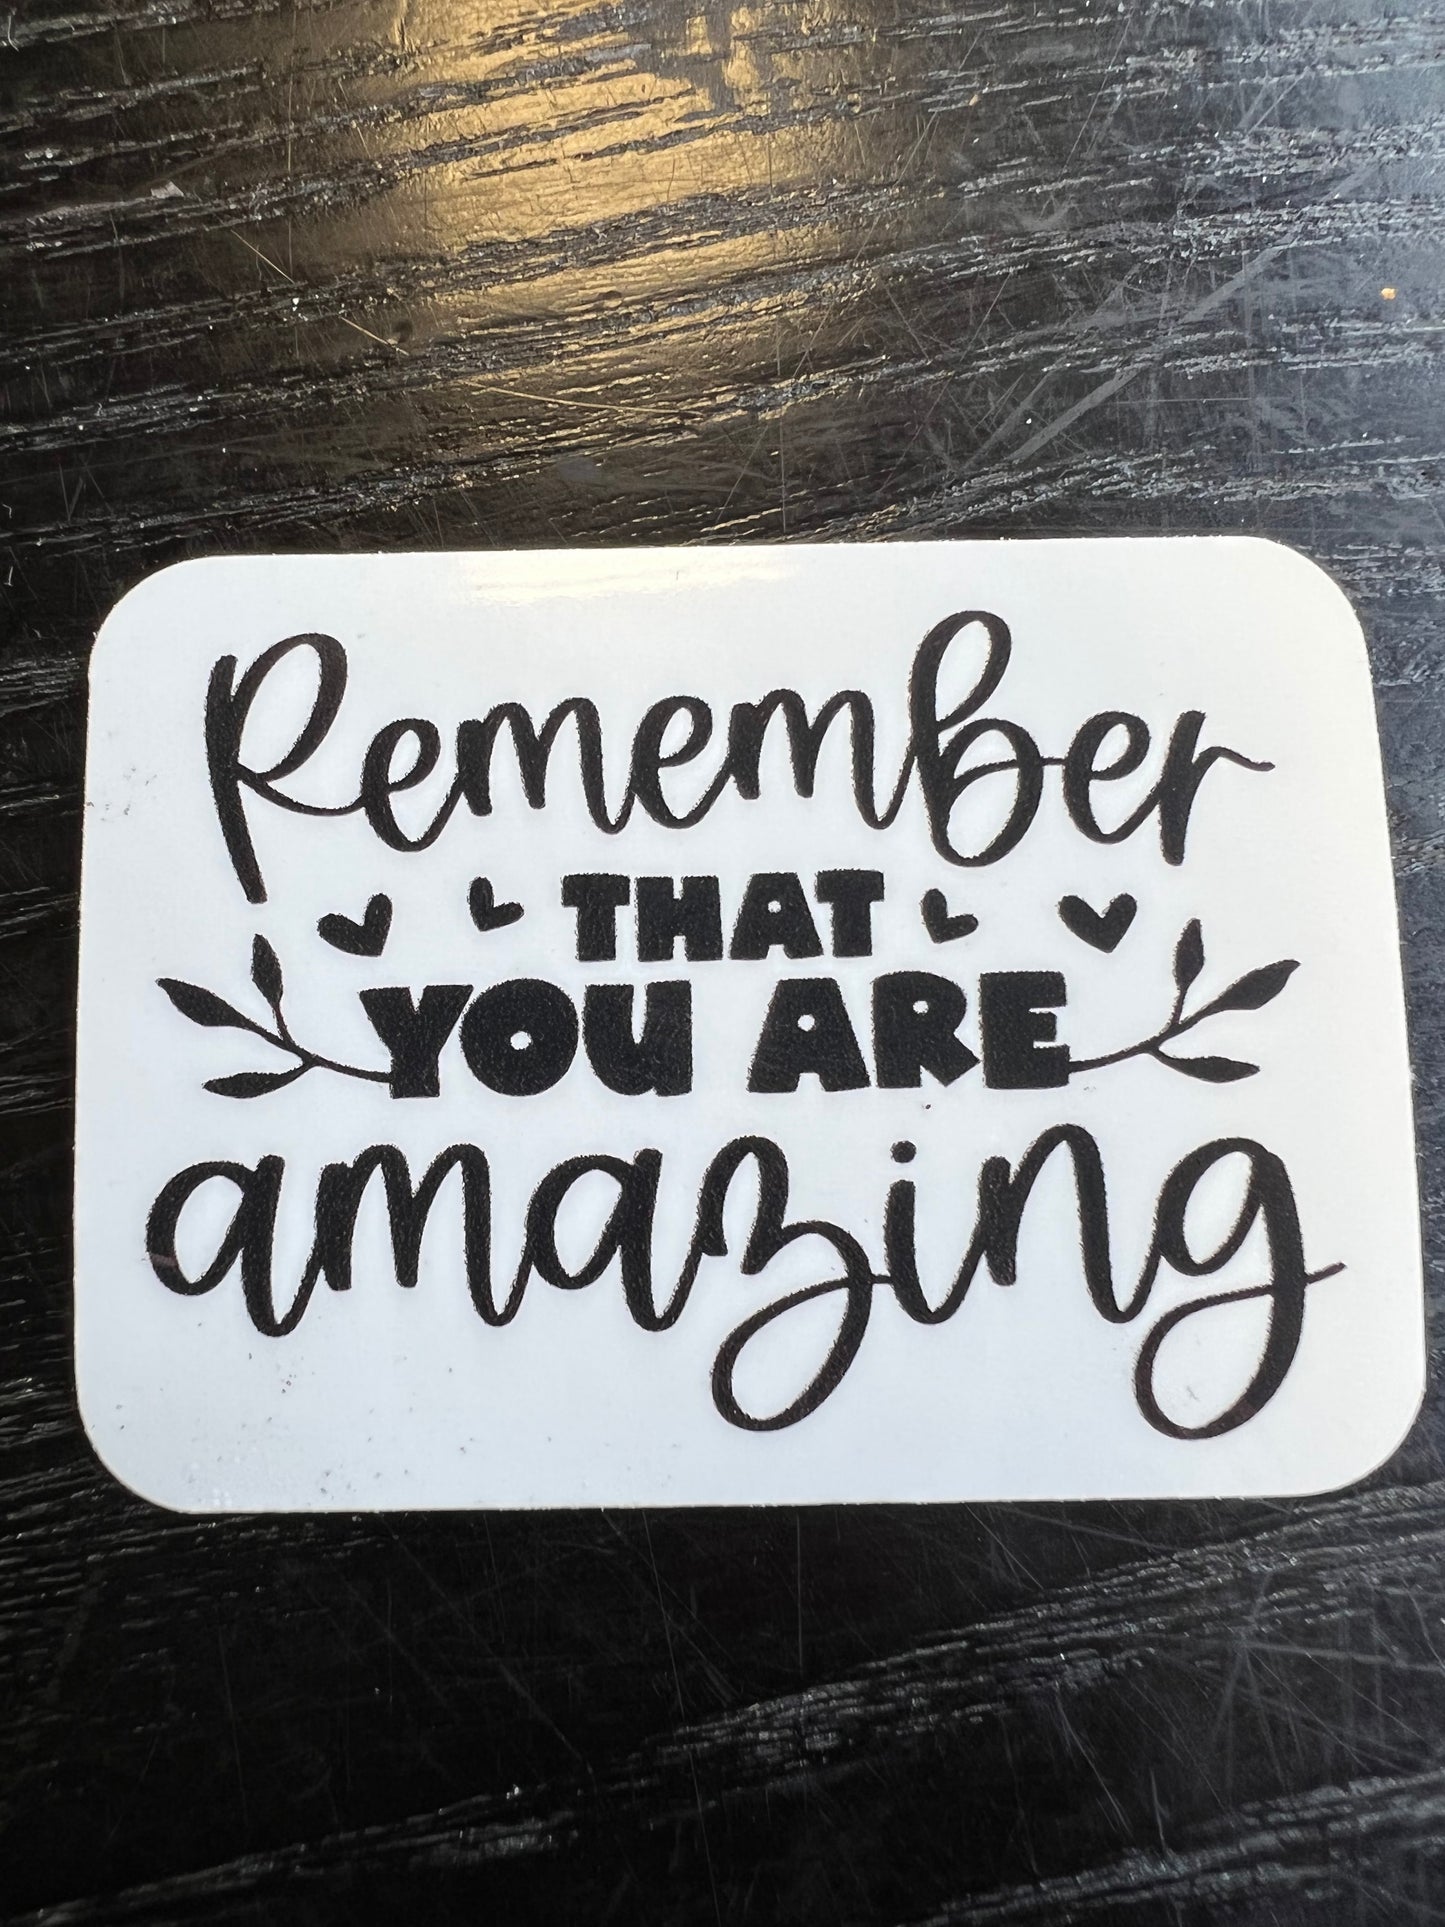 Remember you are amazing! Handmade mental health sticker